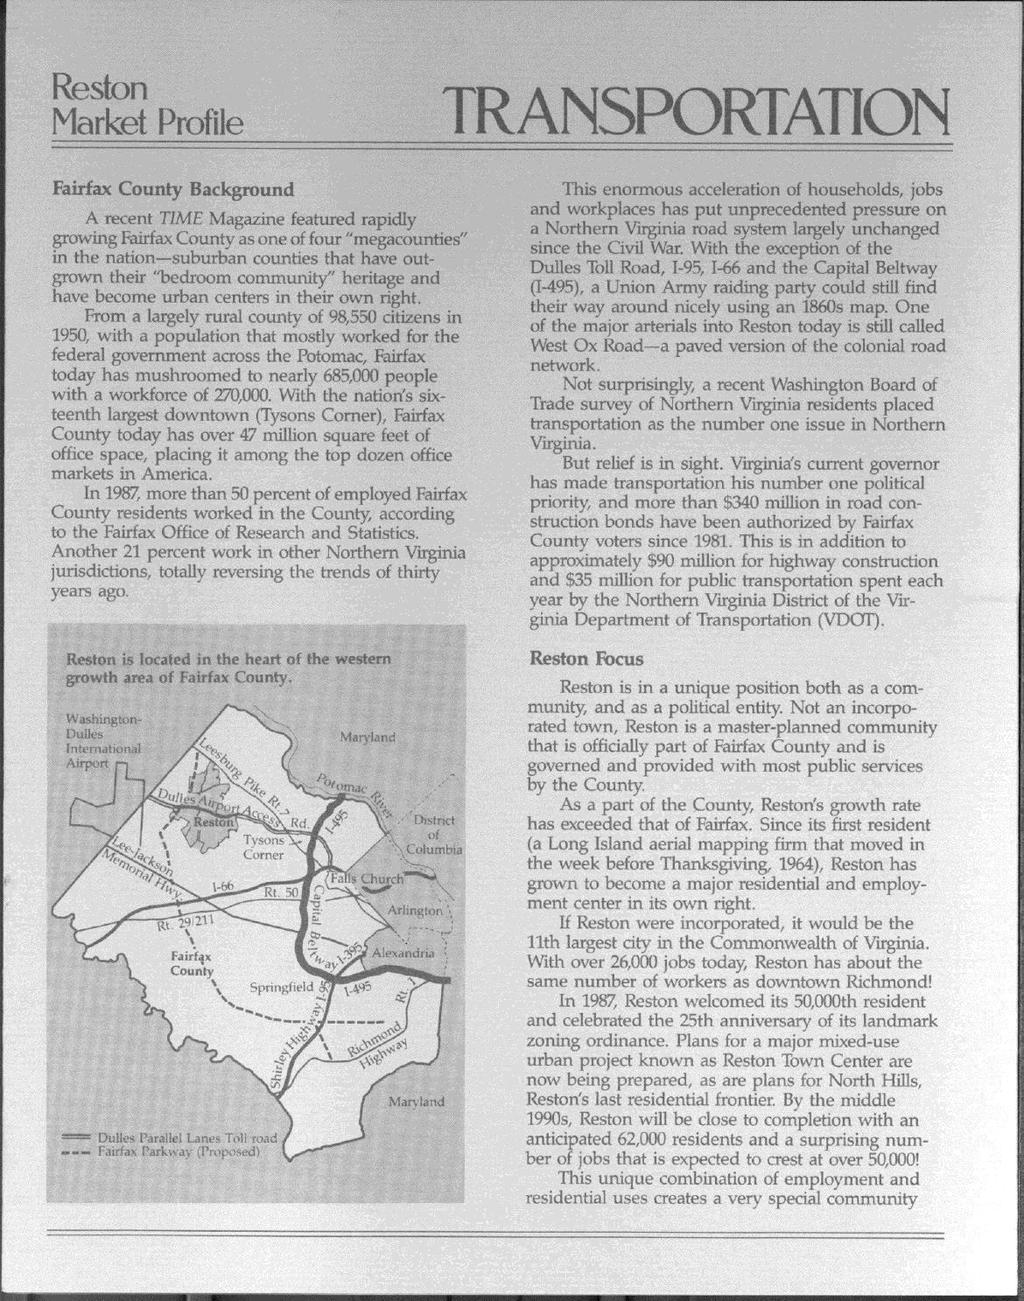 Reston Market Profile TRANSPORTATION Fairfax County Background A recent TIME Magazine featured rapidly growing Fairfax County as one of four "megacounties" in the nation-suburban counties that have